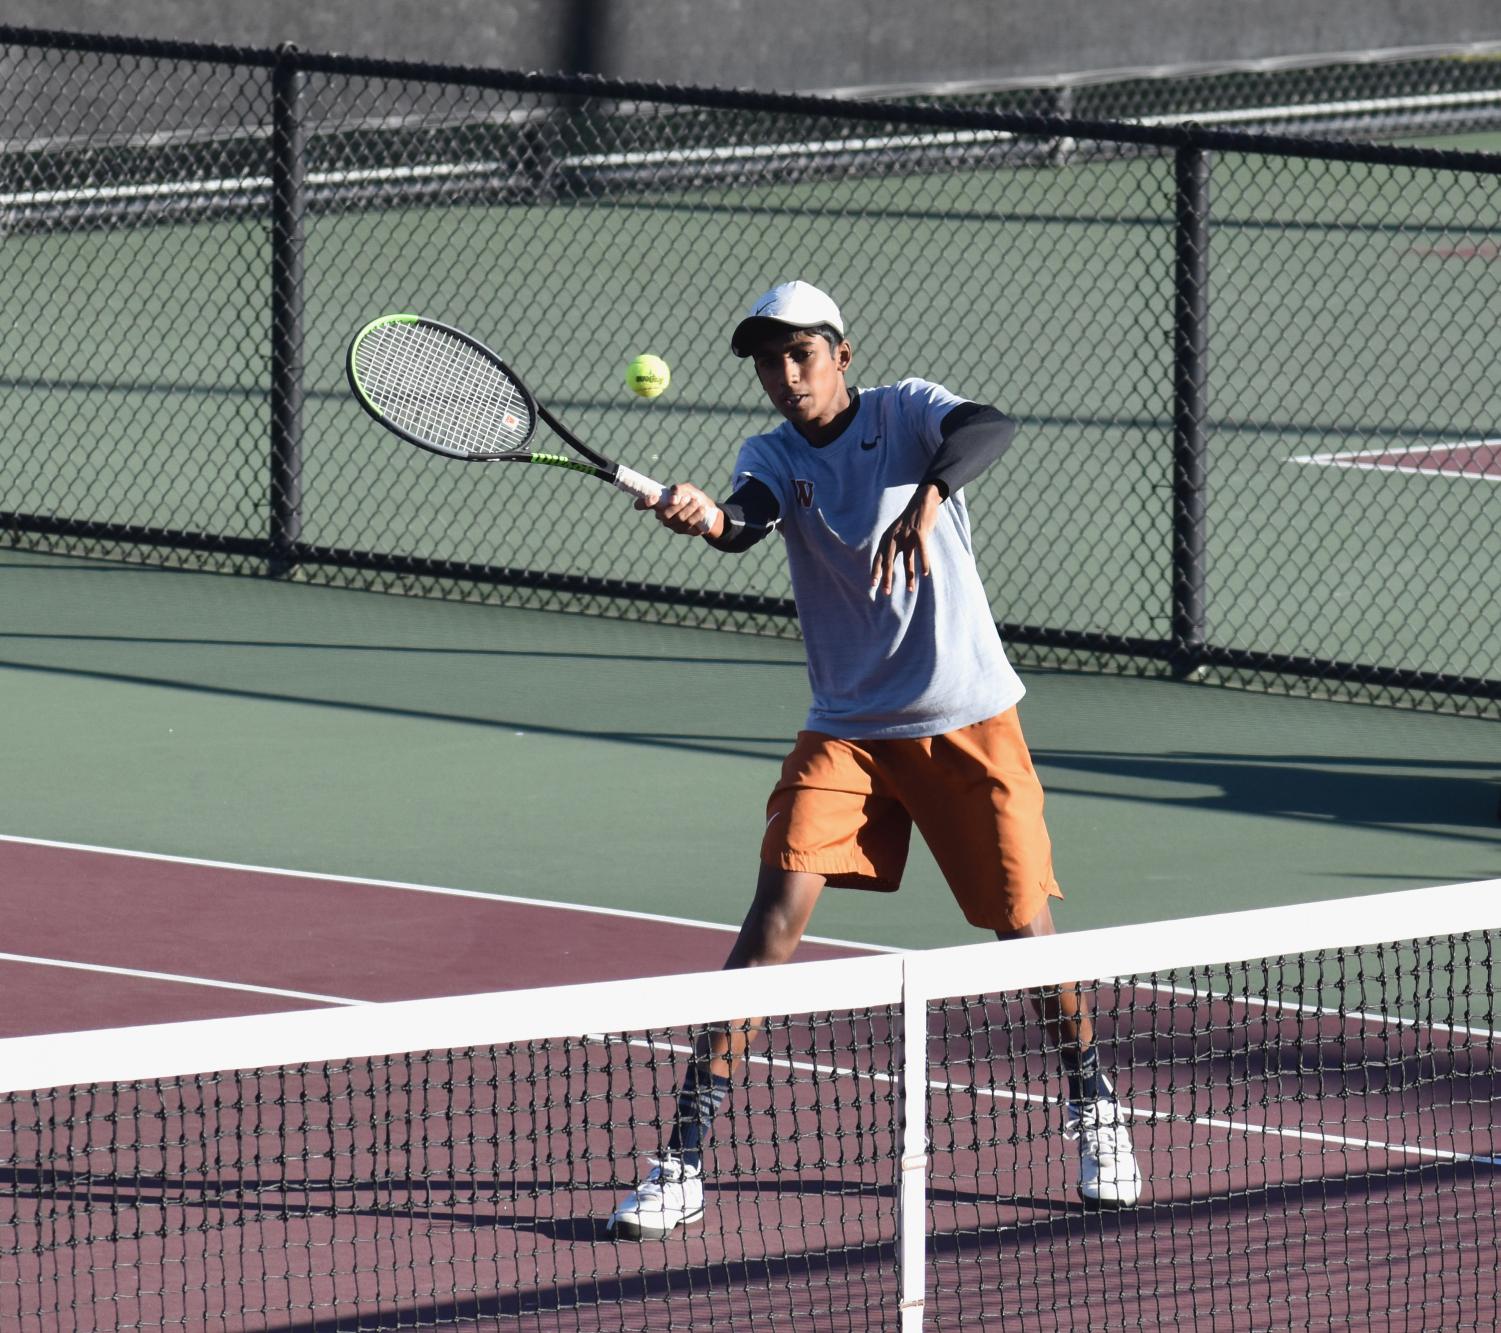 Varsity+Tennis+Reclaims+State+Title+10-3+over+Plano+West+to+Conclude+Momentous+Fall+Season